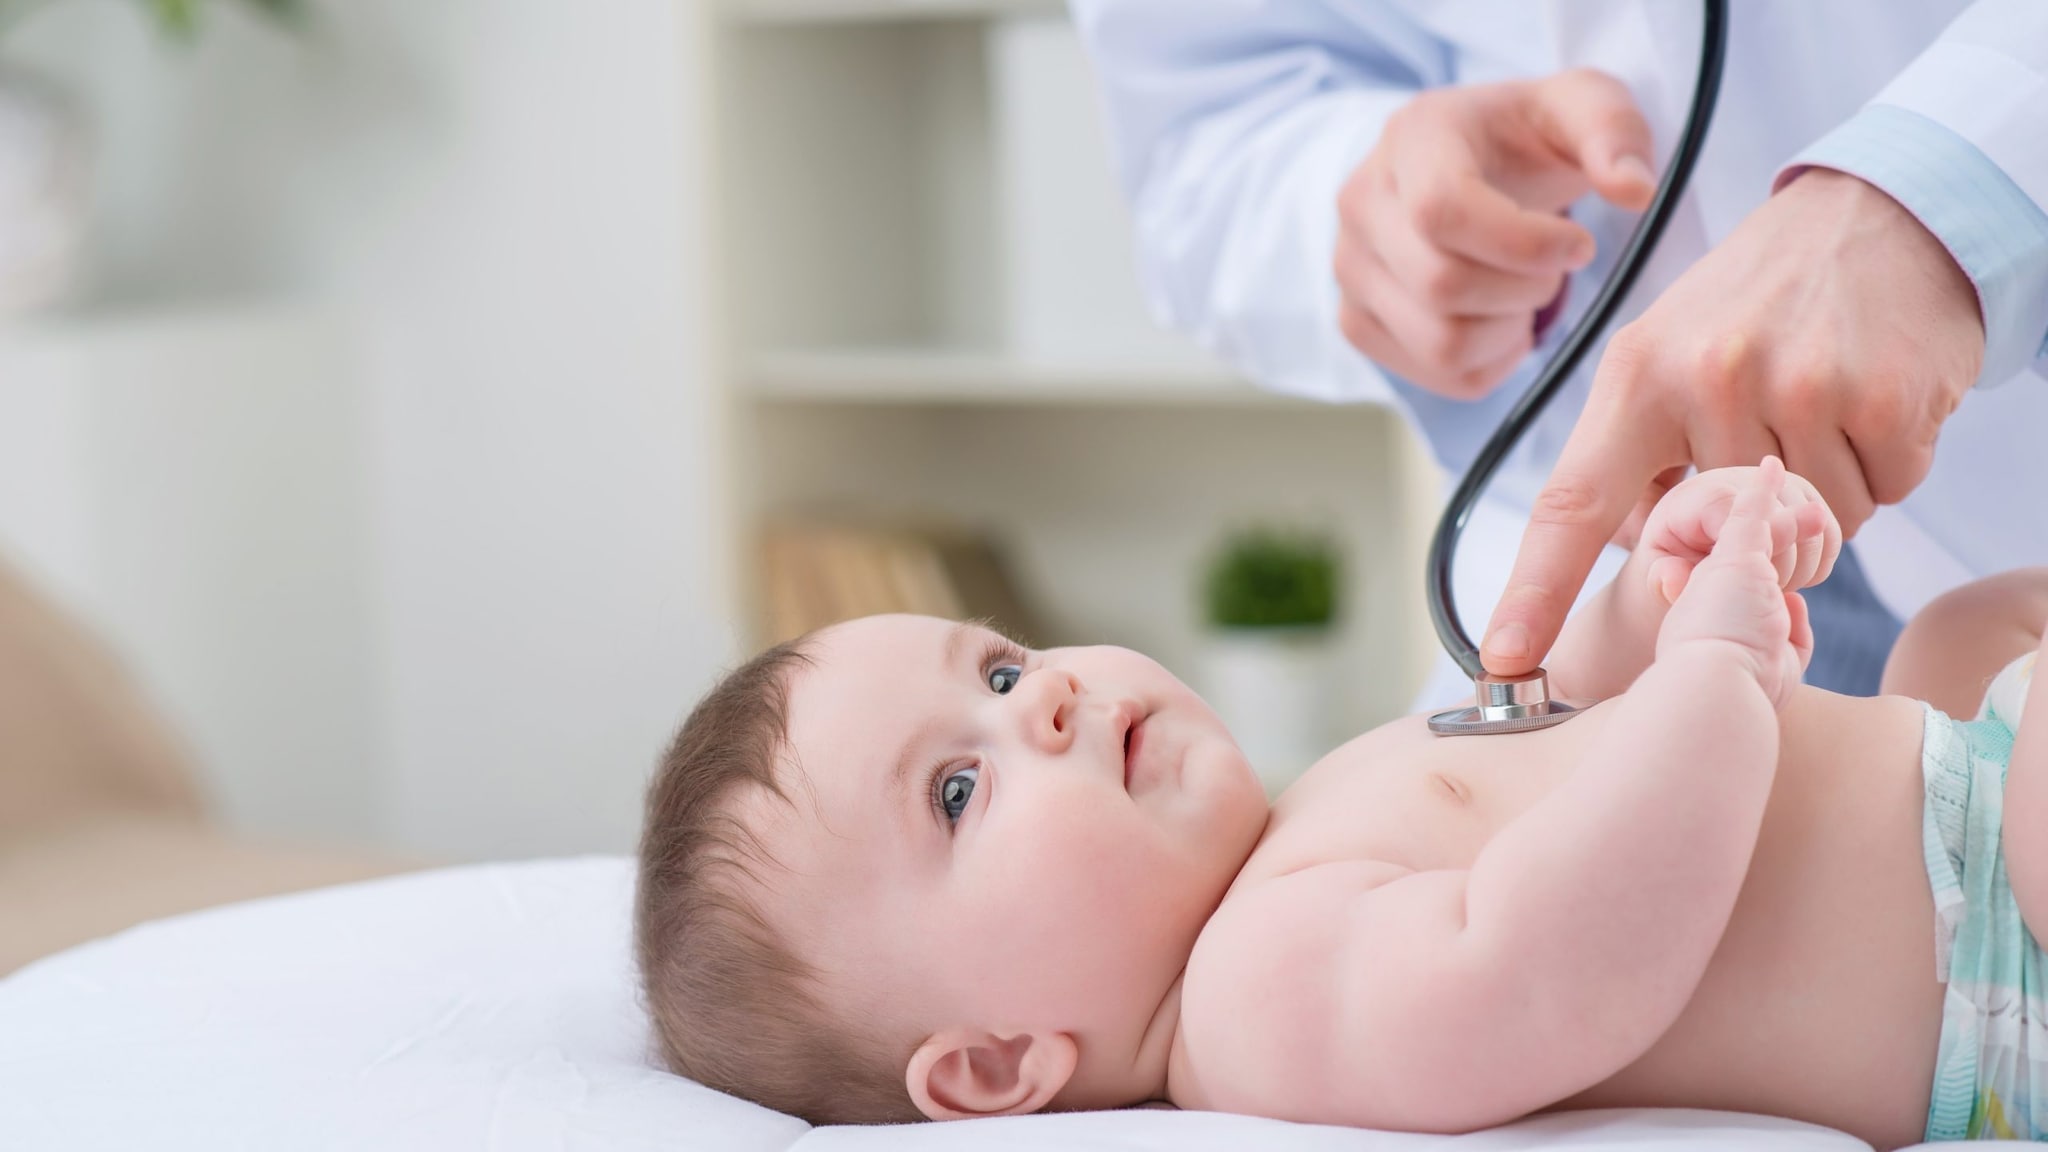 A doctor uses a stethoscope to listen to a baby's lungs.